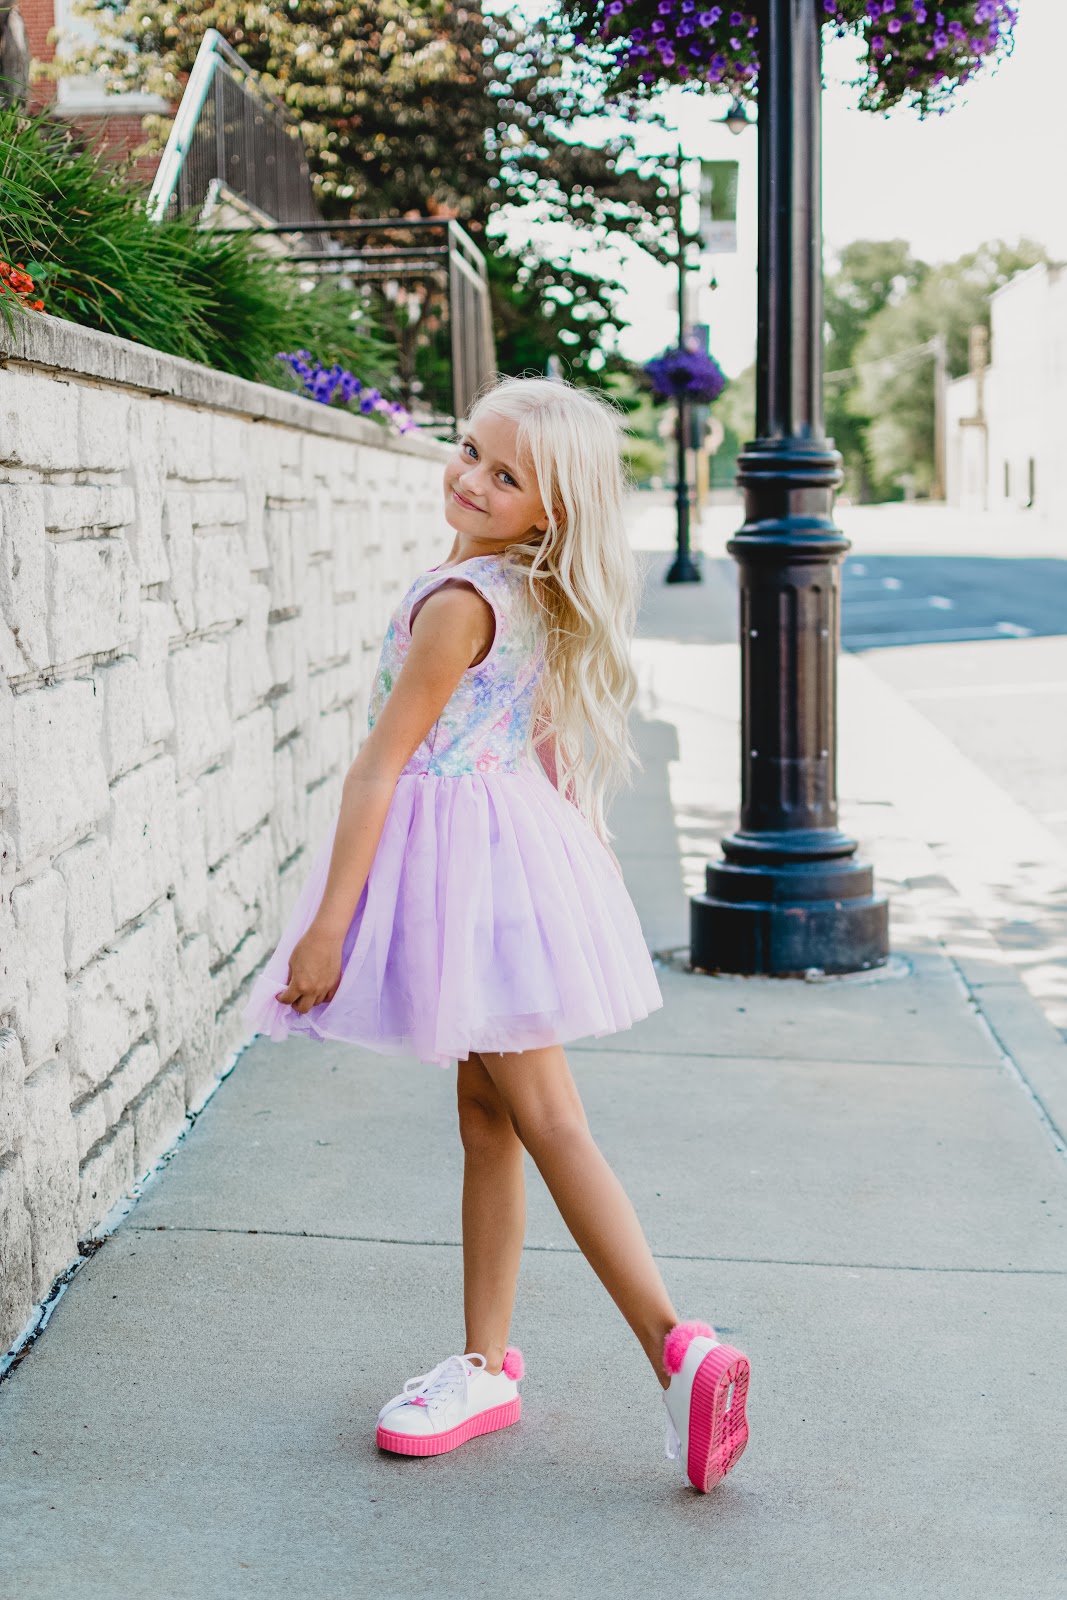 So Many Cute Girls Dresses with Pippa & Julie - dress little girl outfit idea summer tulle rainbow chiffon beautiful beach blonde